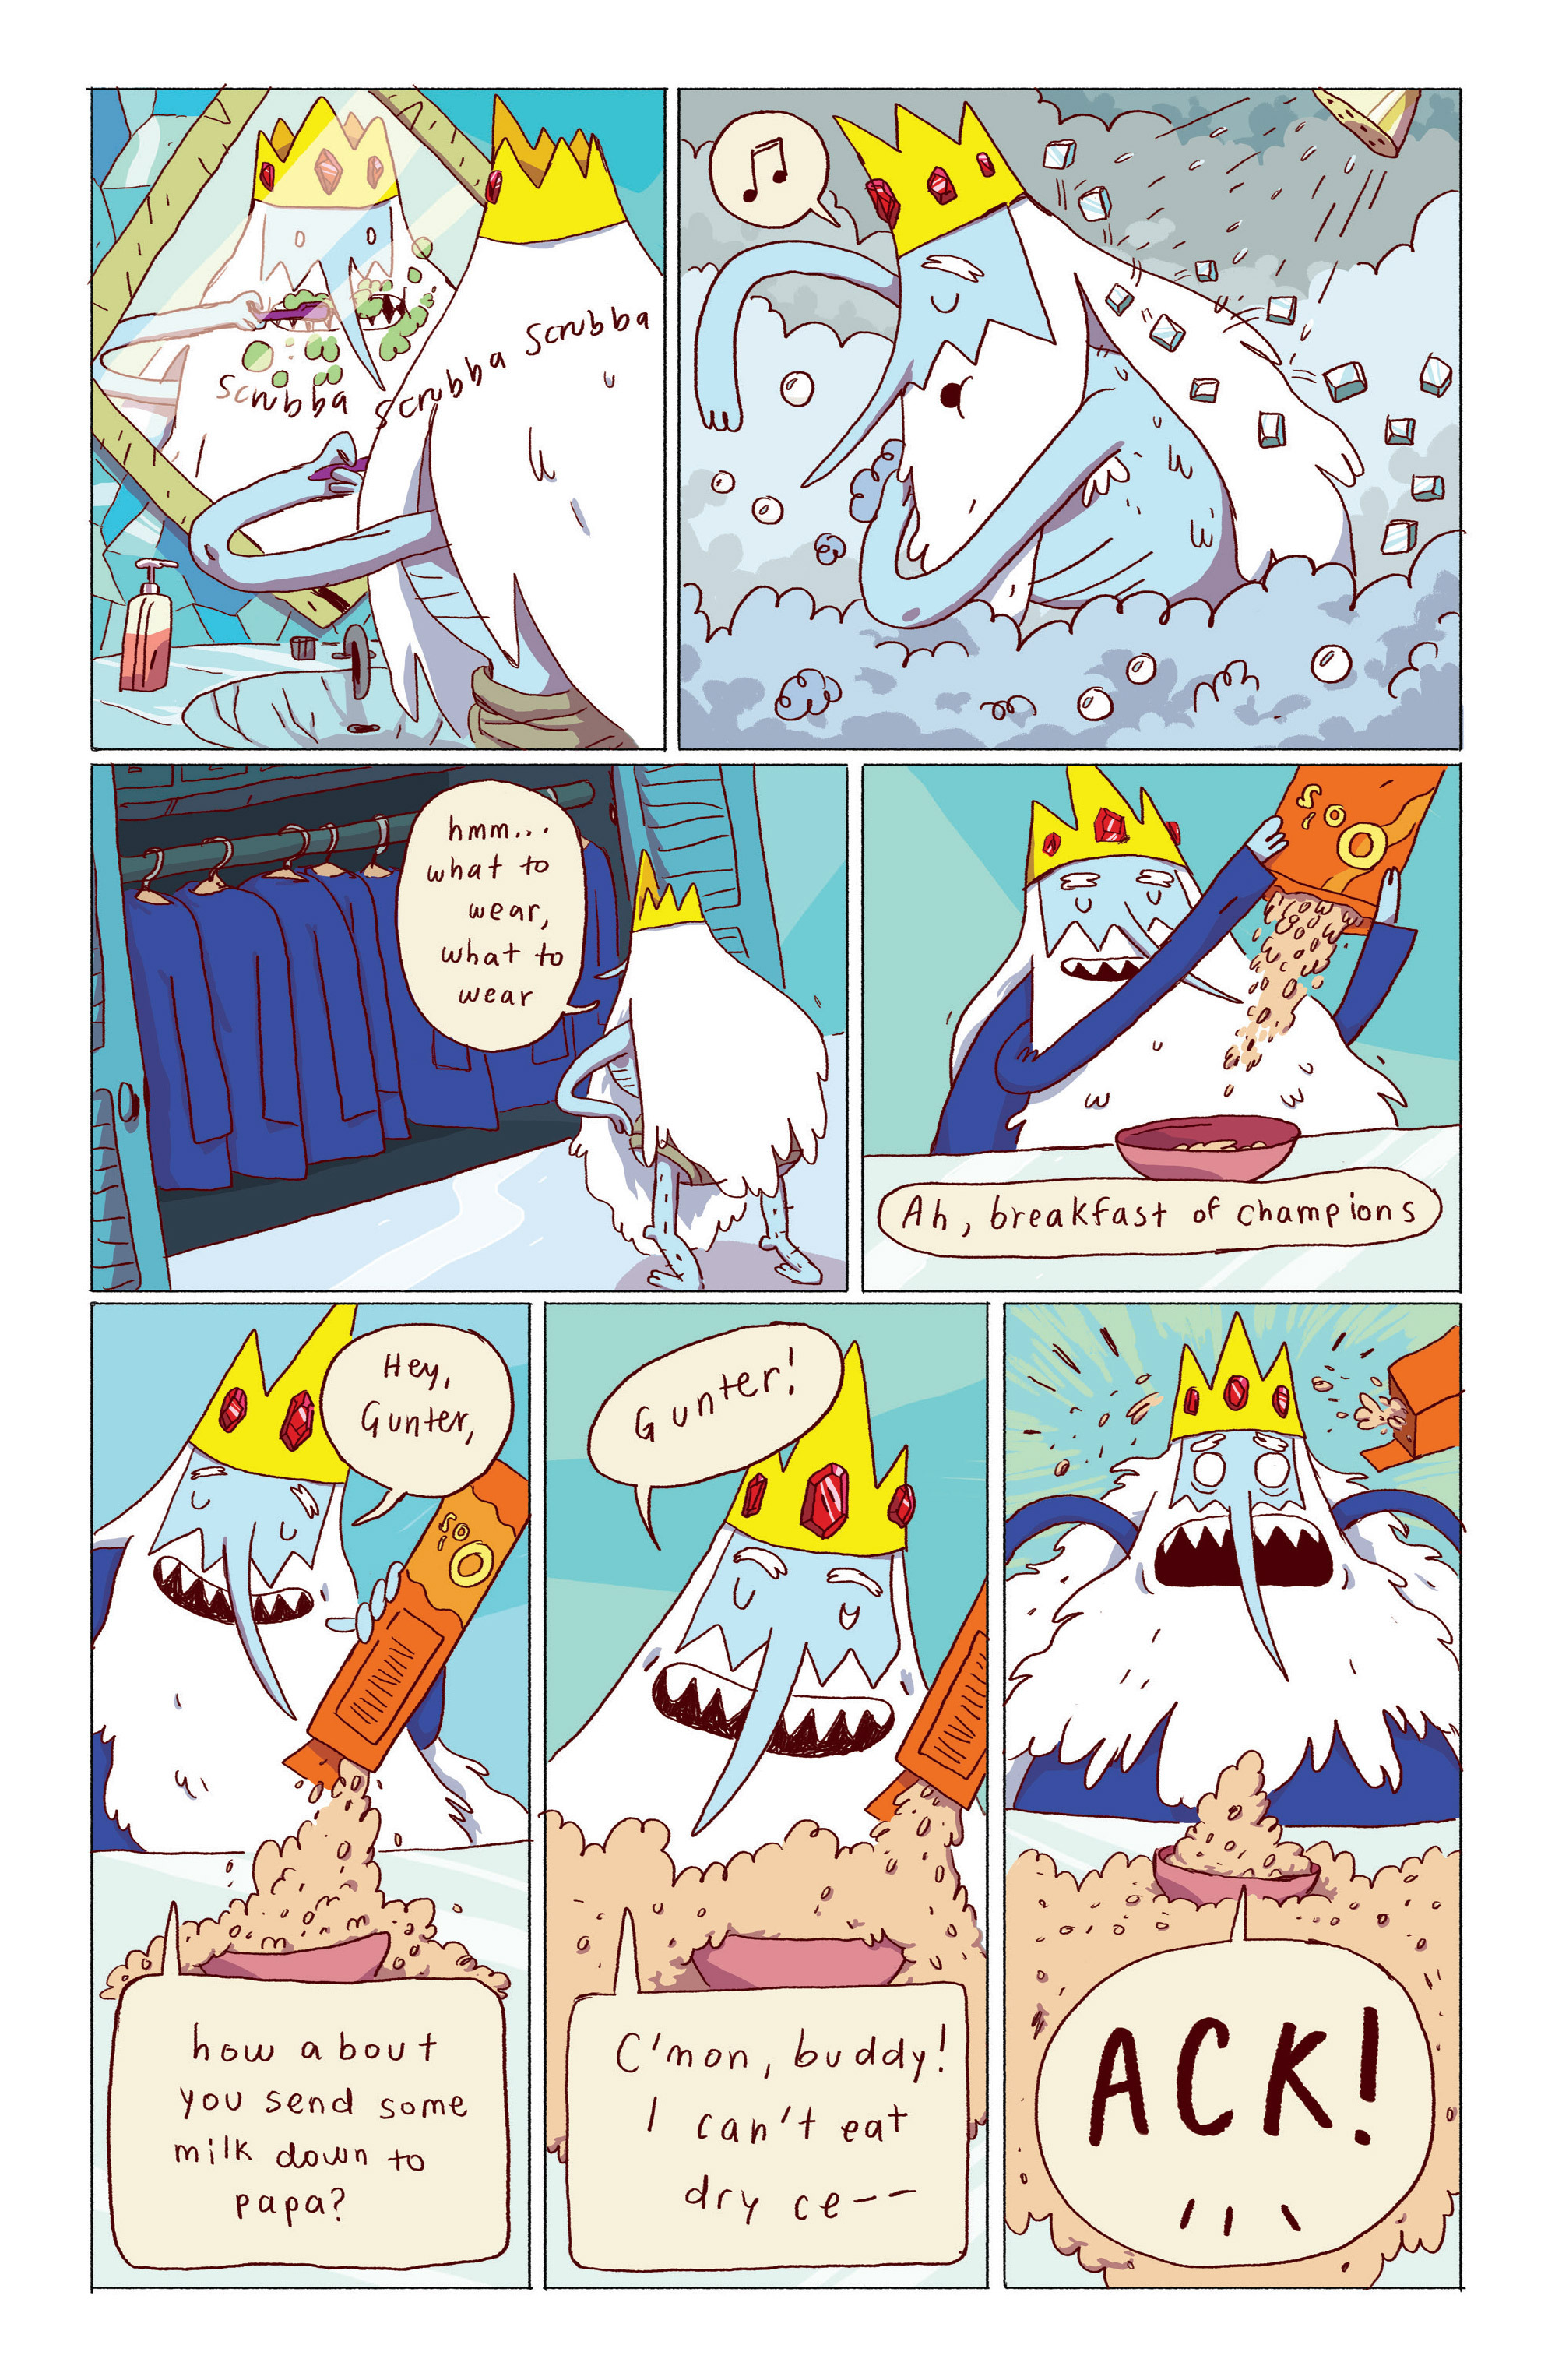 Adventure Time Ice King Issue 1 | Read Adventure Time Ice King Issue 1  comic online in high quality. Read Full Comic online for free - Read comics  online in high quality .|viewcomiconline.com